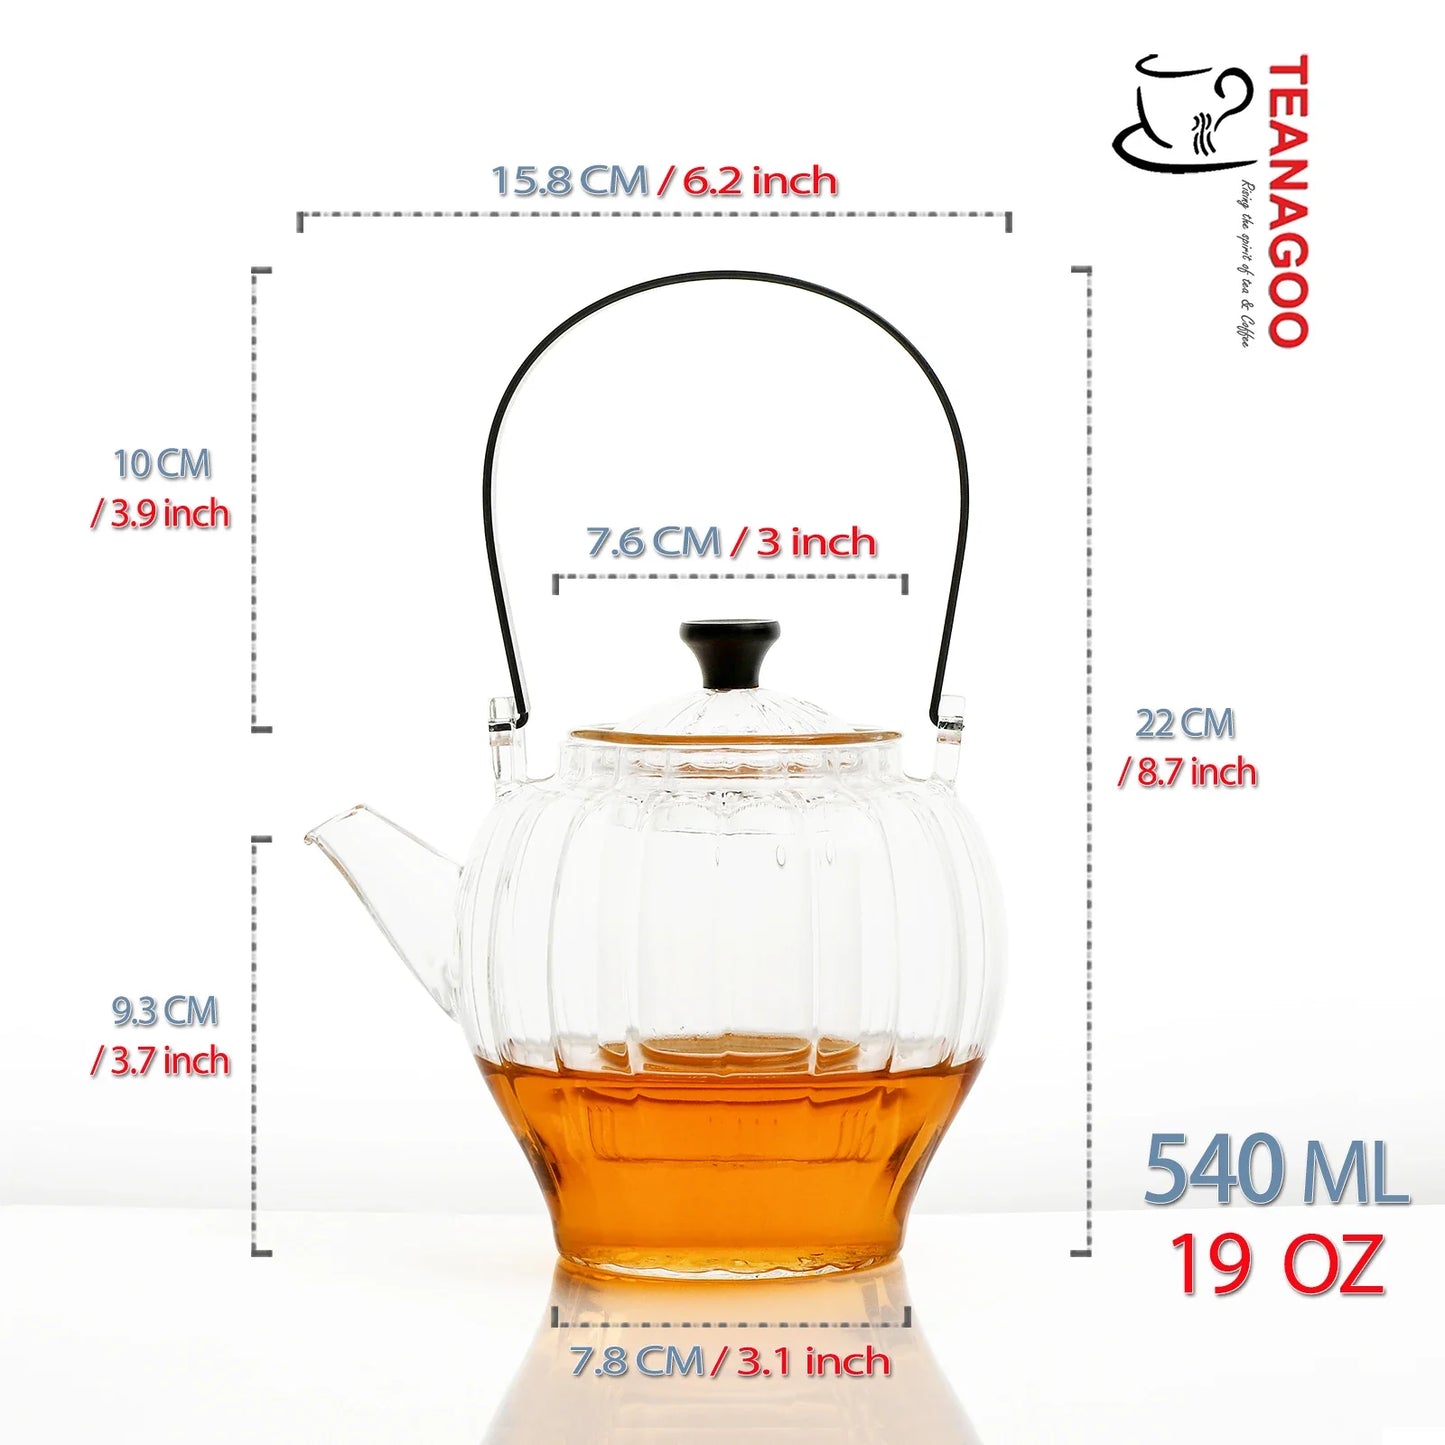 Pyrex teapot with glass infuser safe on stovetop to brew tea